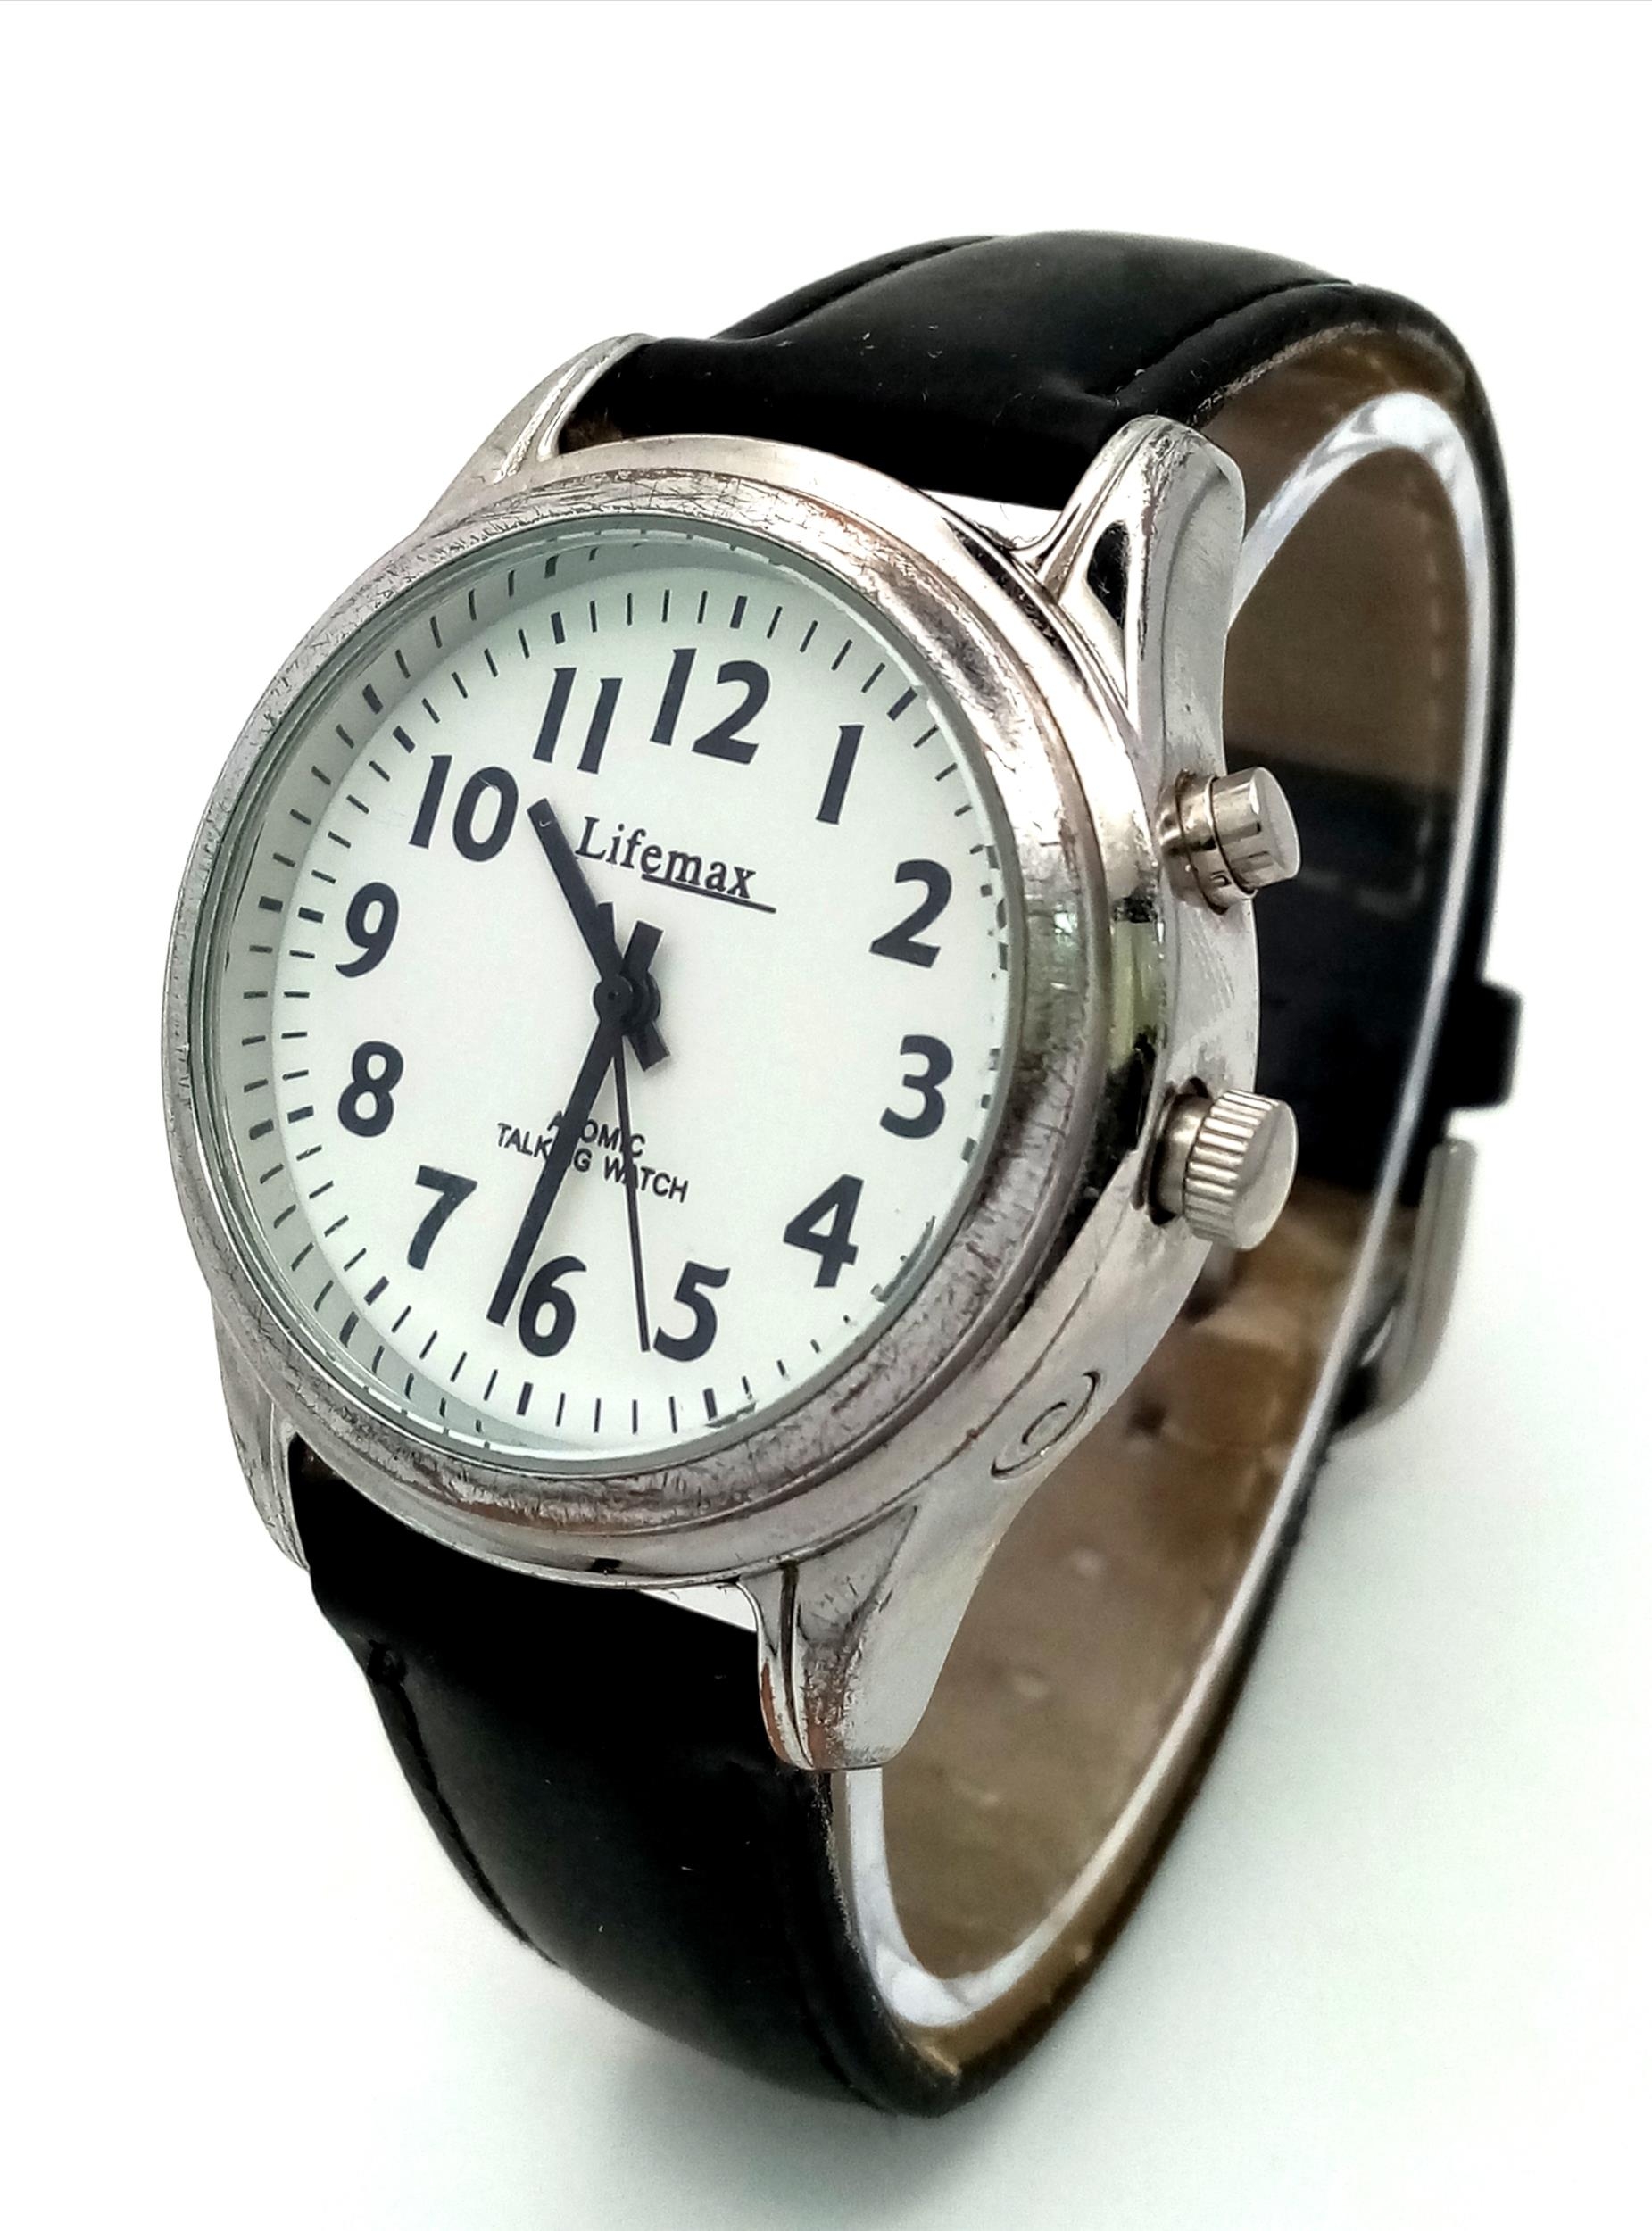 A Very Interesting and Scarce Vintage Lifemax Atomic Talking Watch with Radio Signal Updated Timing. - Image 3 of 5